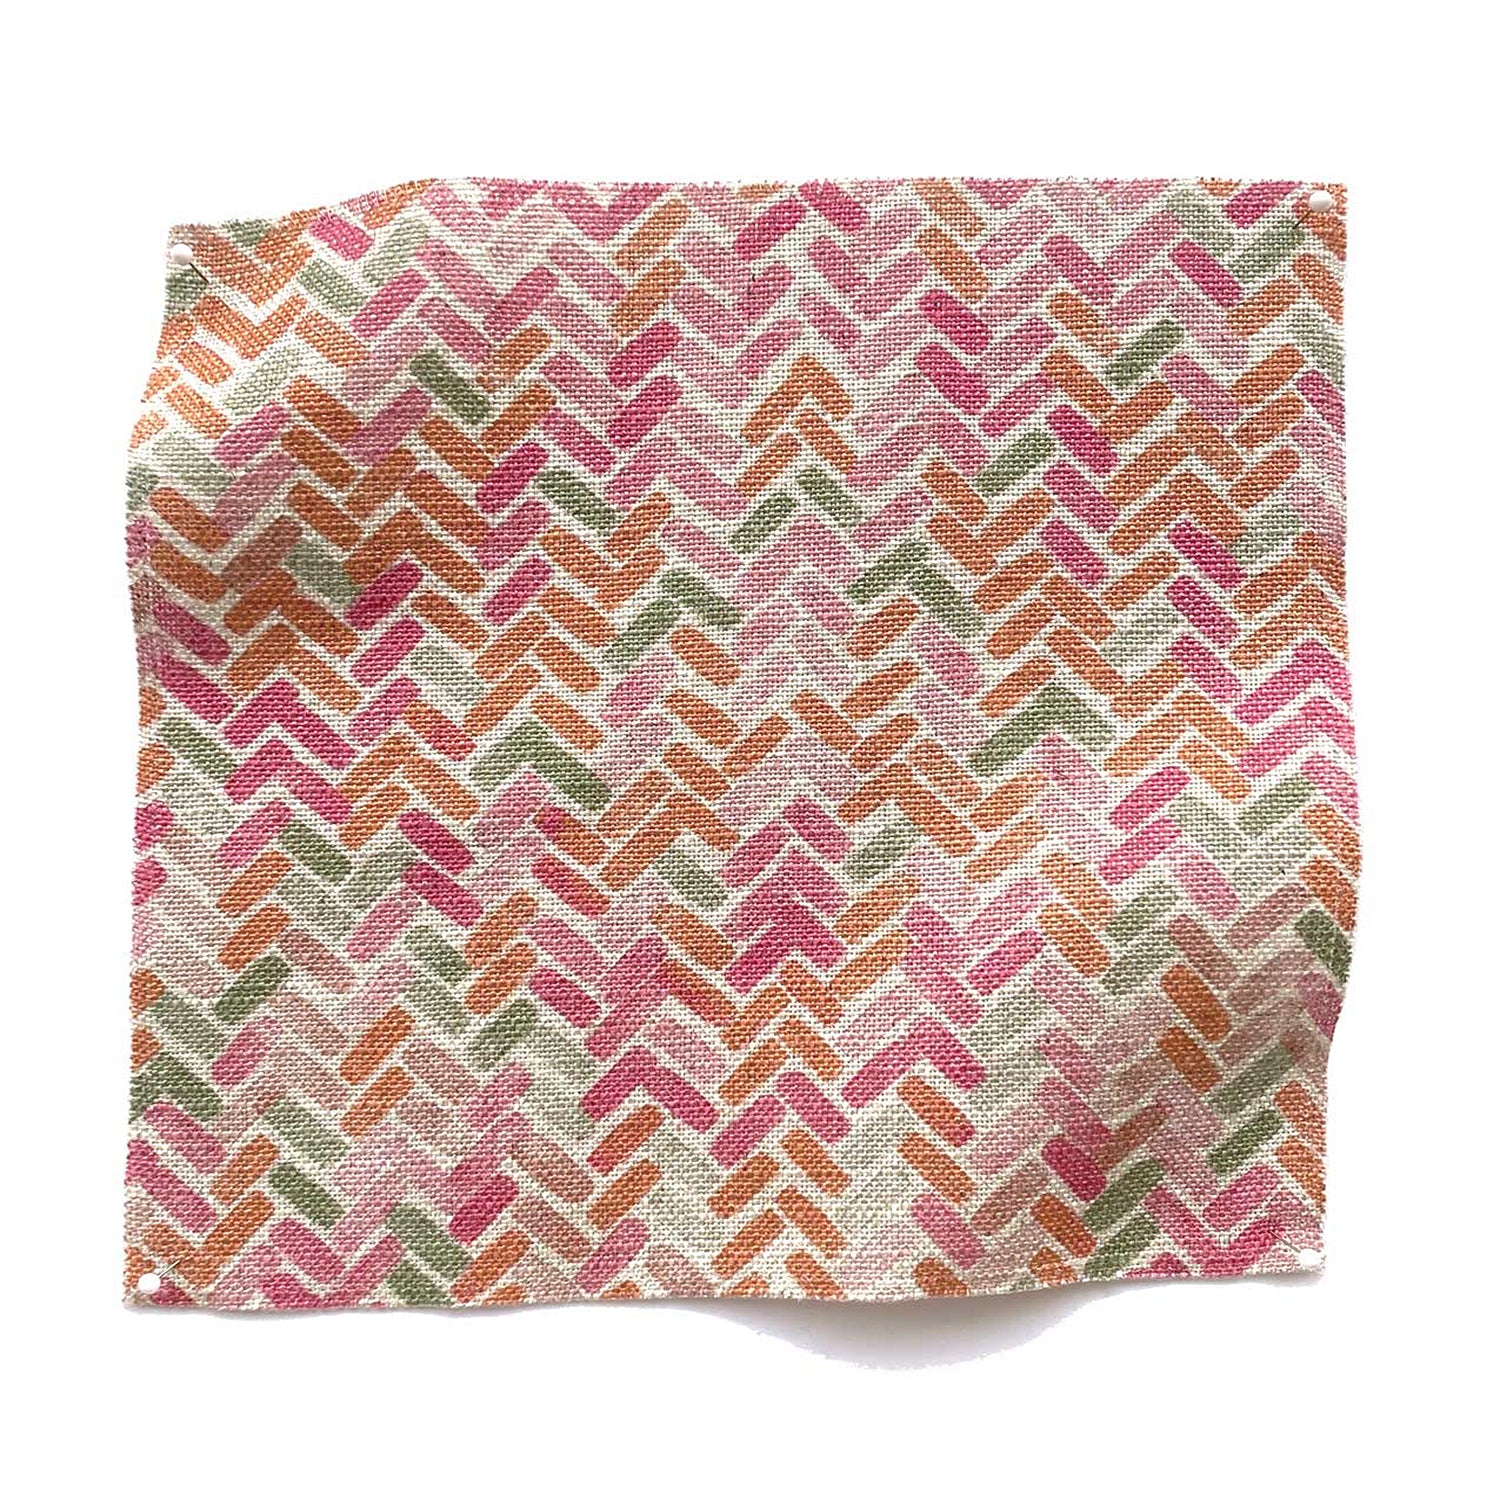 Square fabric swatch in a thatched herringbone pattern in shades of pink, orange and green.